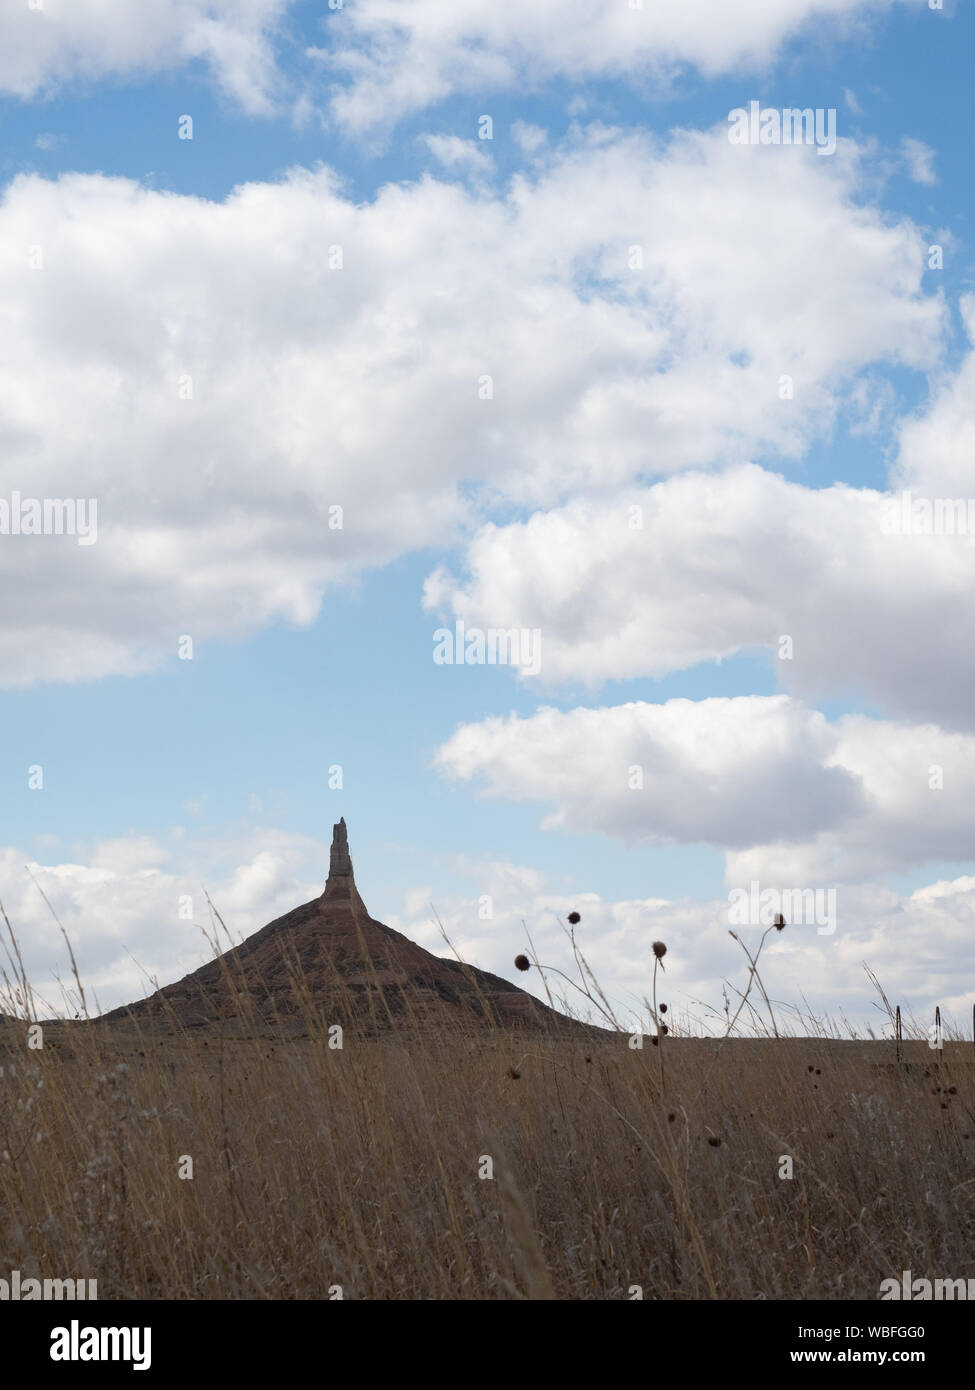 Chimney Rock National Historic Site in Nebraska with field with dried vegetation in the foreground. Cloudy skies above. Stock Photo